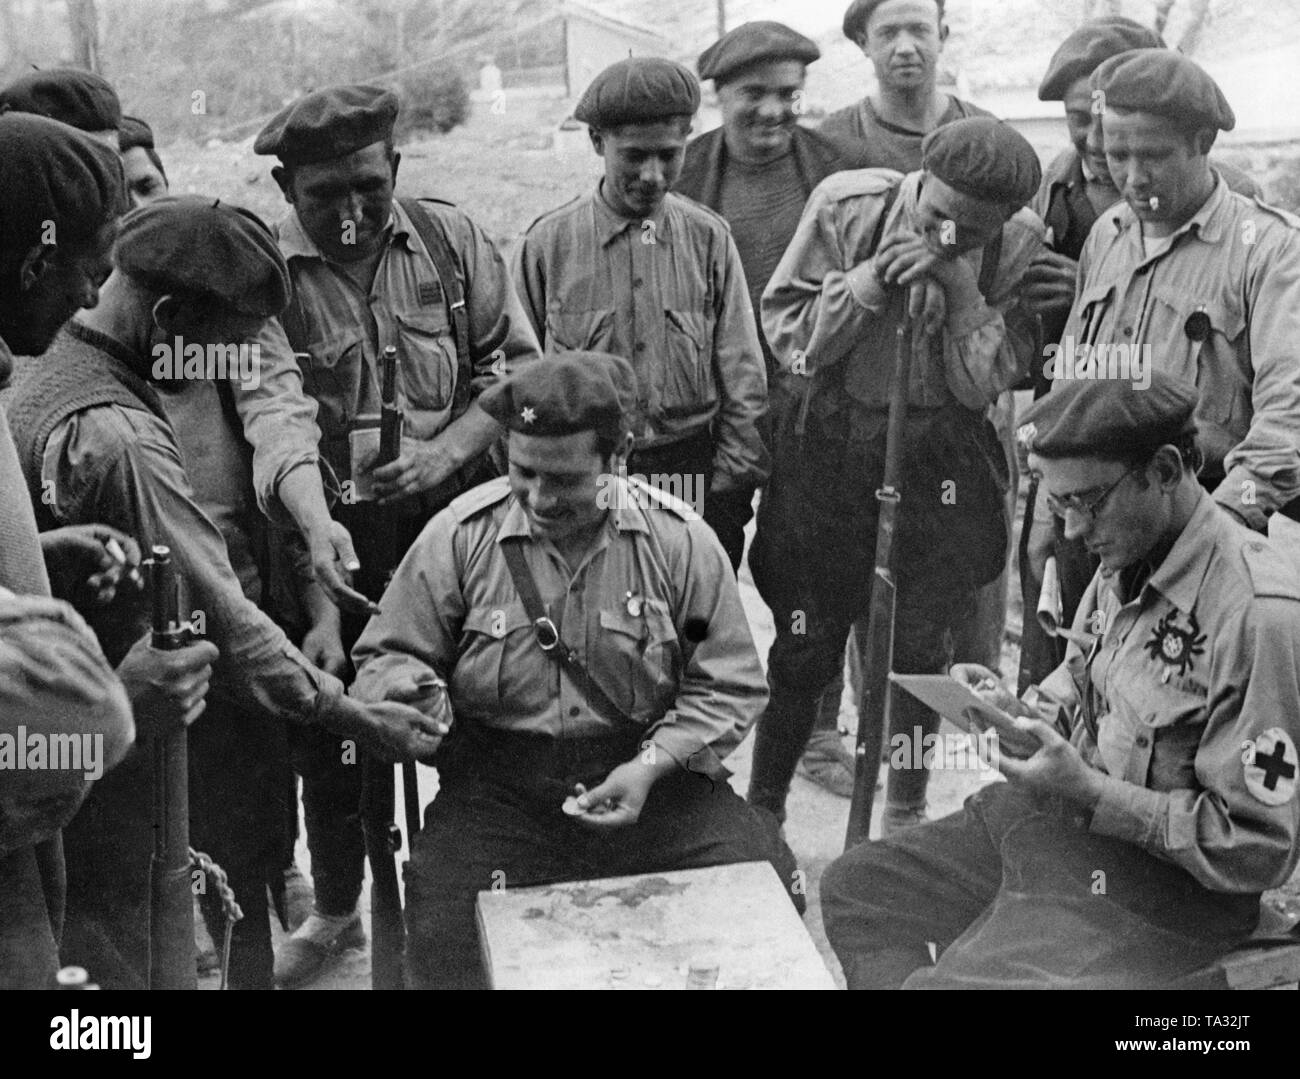 A lieutenant (with a star on his cap) of a volunteer unit of the Spanish national troops, pays his soldiers while sitting at a table (in breeches and field tunic). Behind him on the left, a corporal (three strips on his chest). On the right side of the table, there is a military doctor sitting  with a crab badge, and he is taking notes of the payouts. On the table, a pile of silver coins. Stock Photo